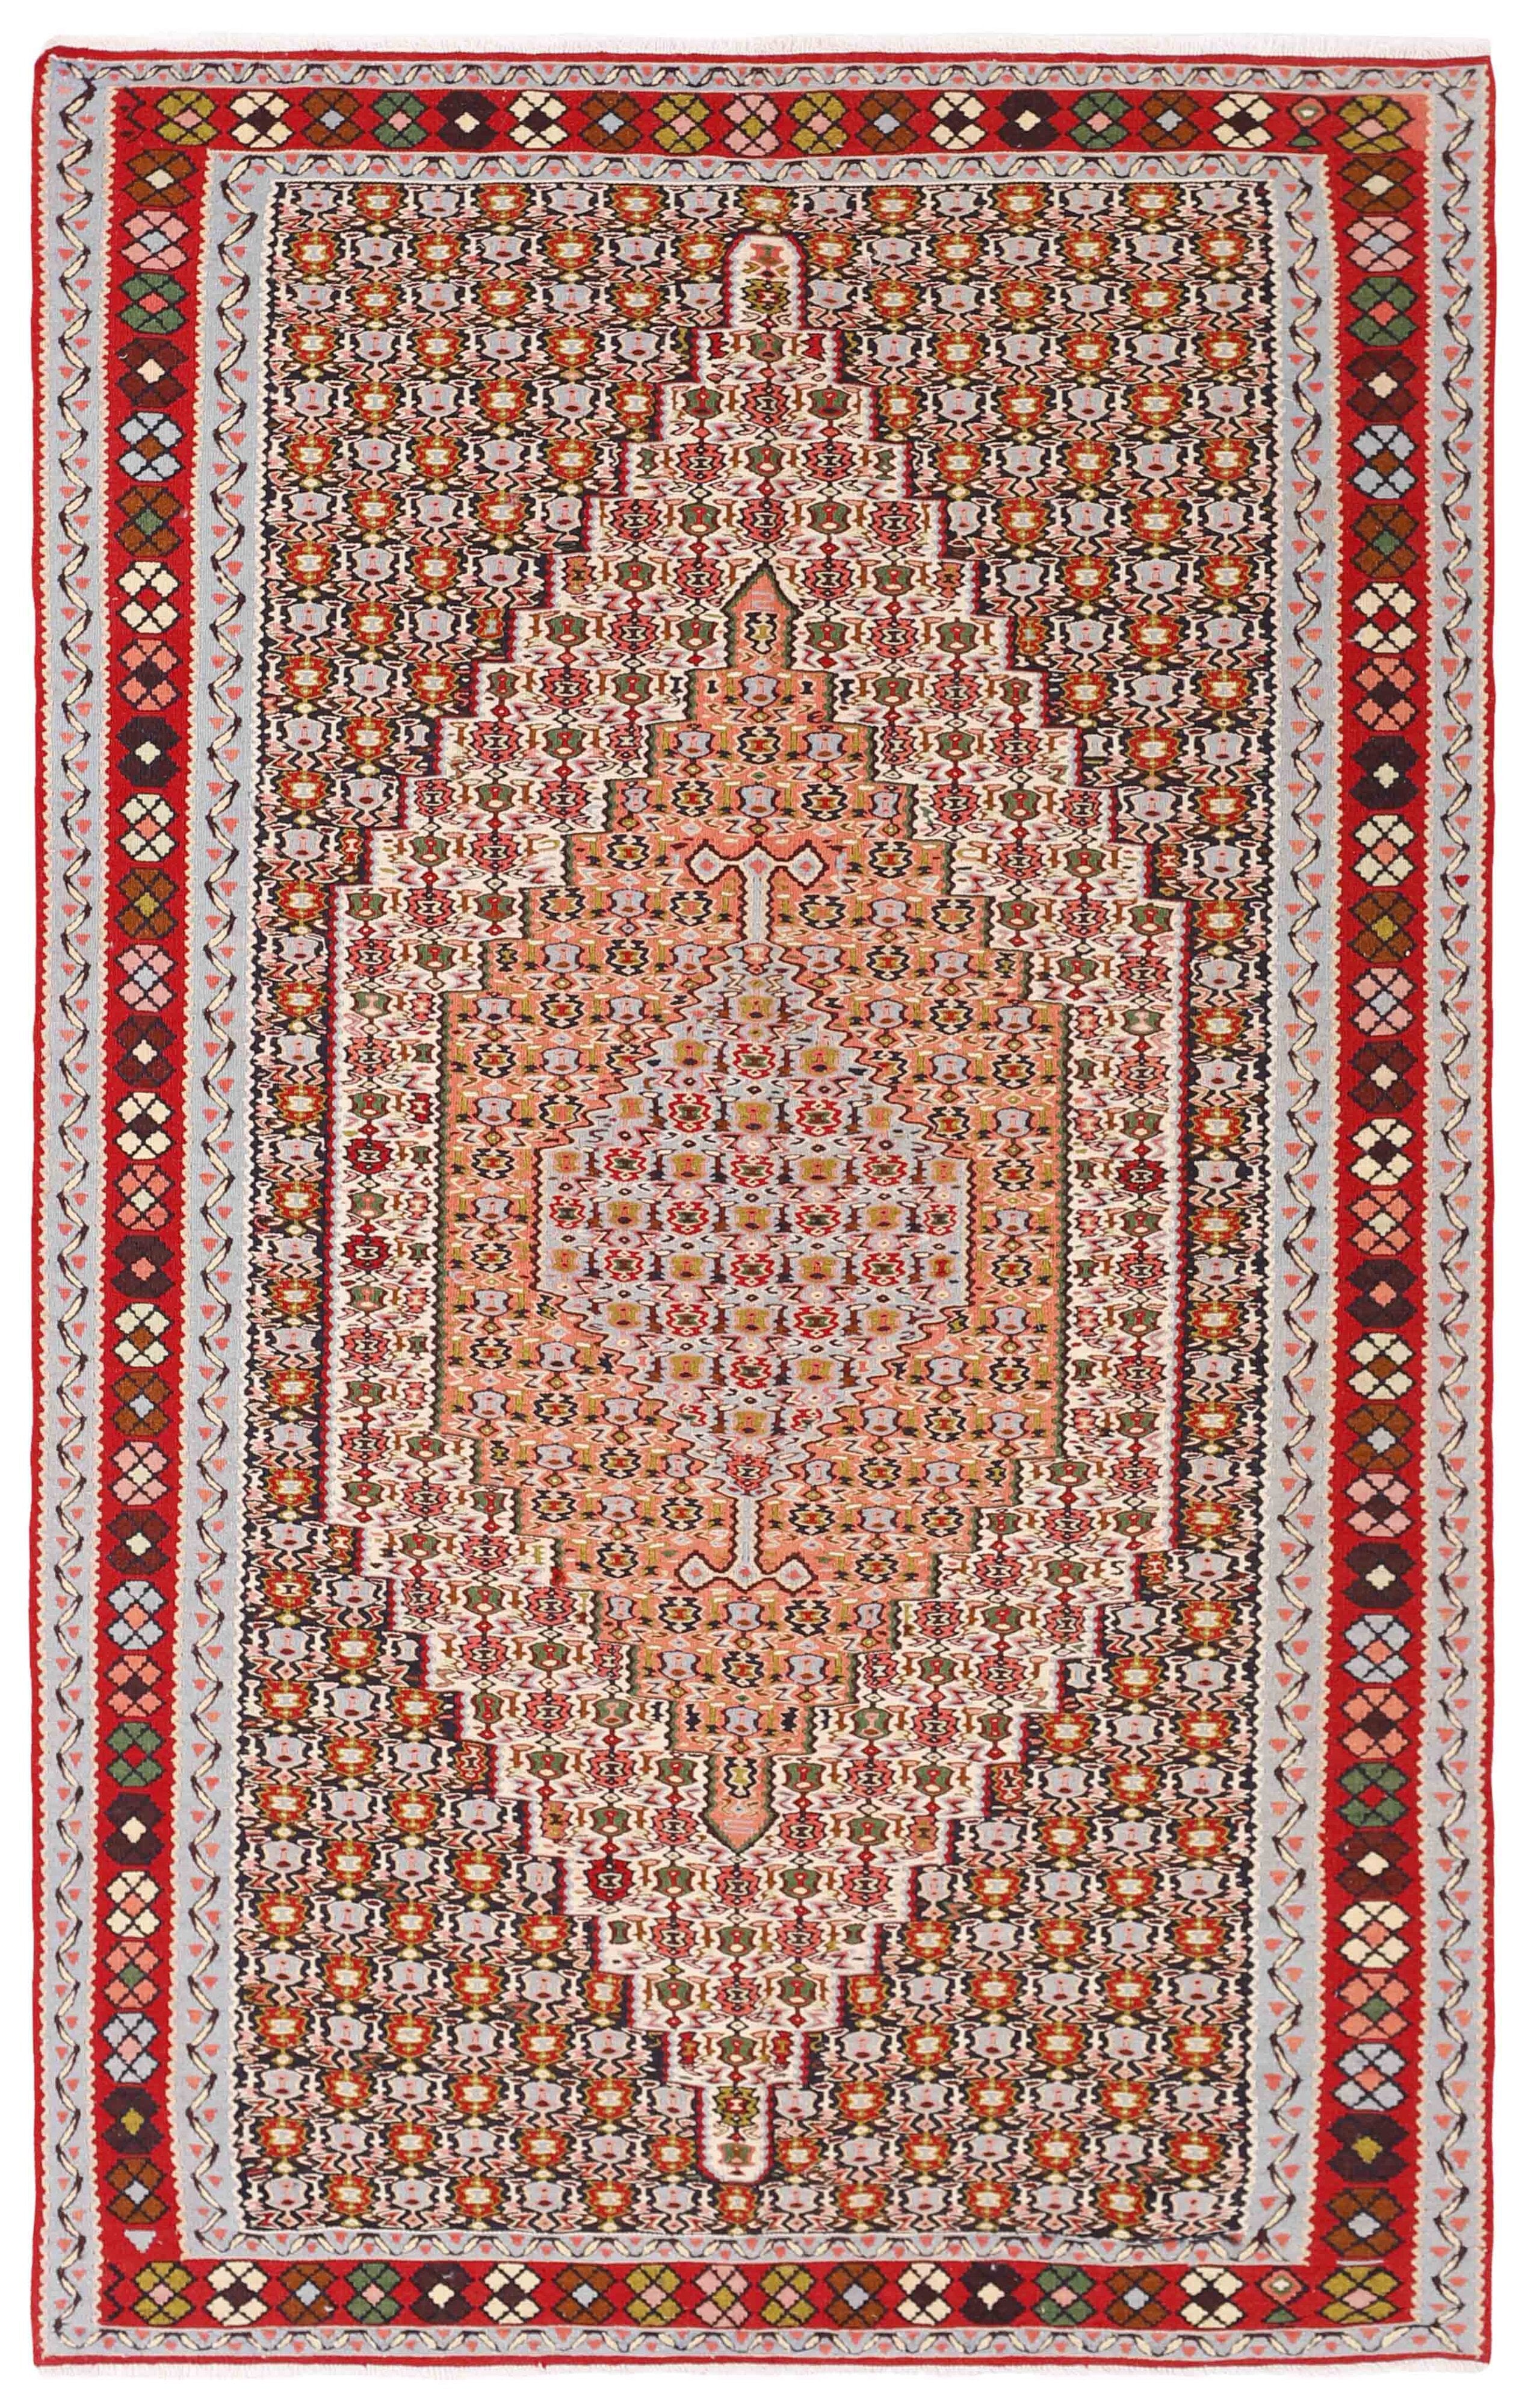 Authentic persian kelim flatweave rug with traditional geometric floral design in beige, red and blue